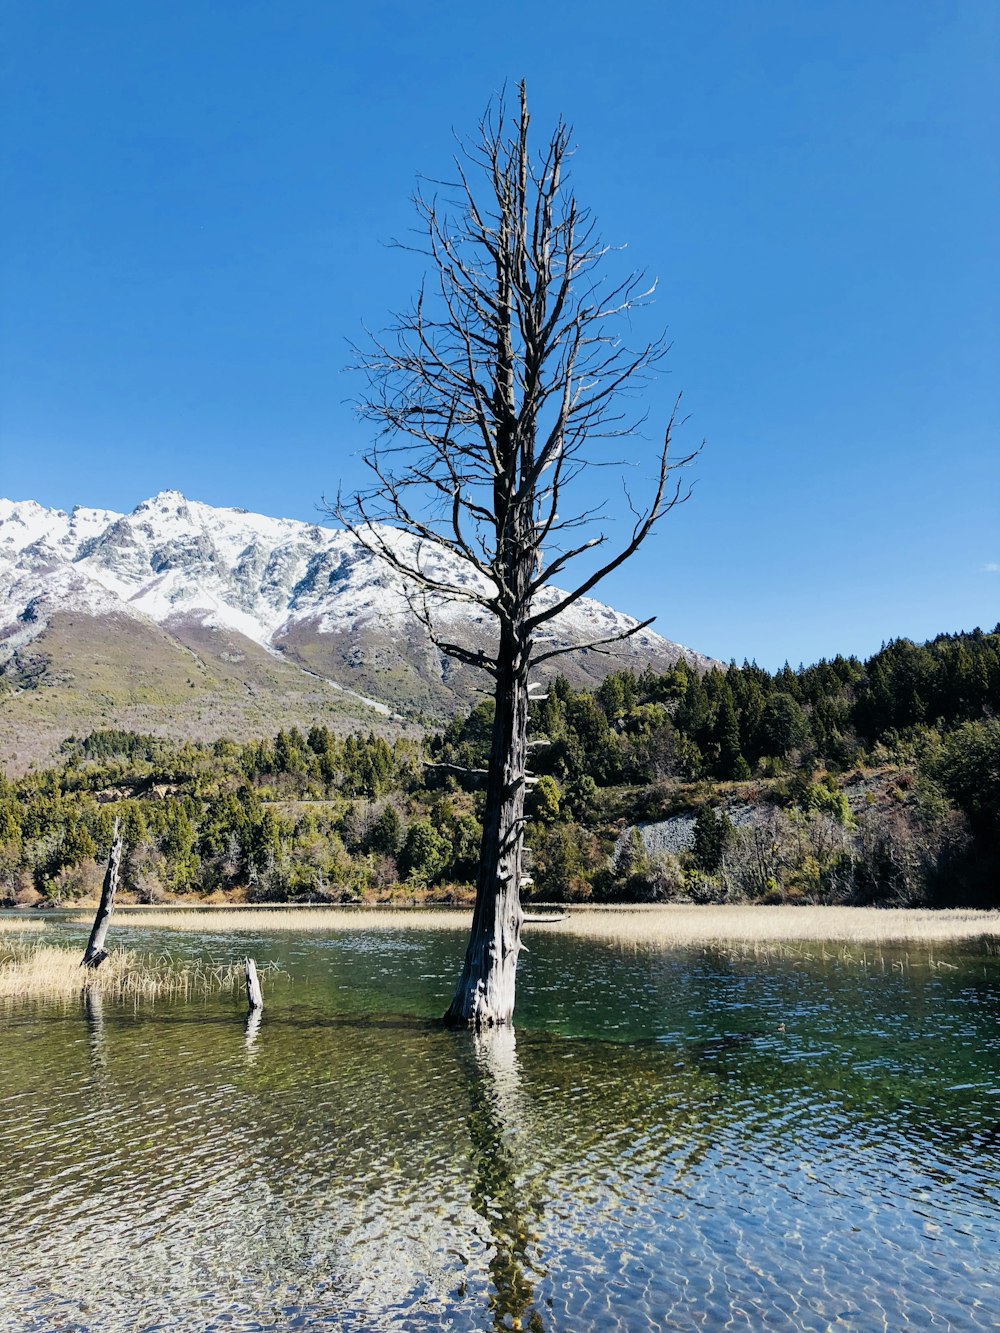 bare tree on body of water viewing mountain under blue and white skies during daytime